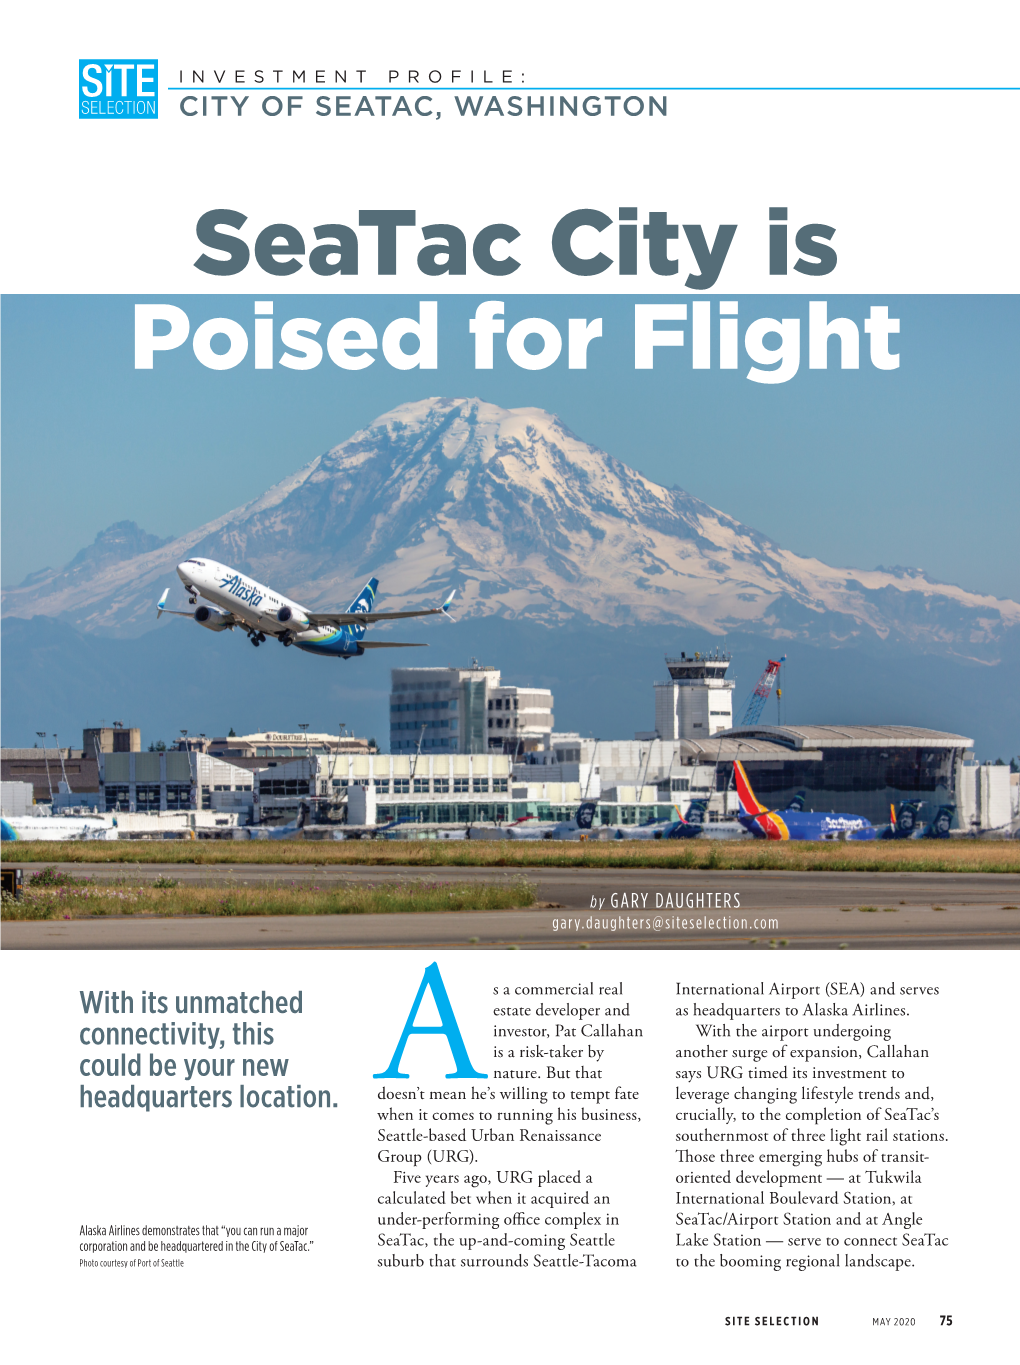 Seatac City Is Poised for Flight